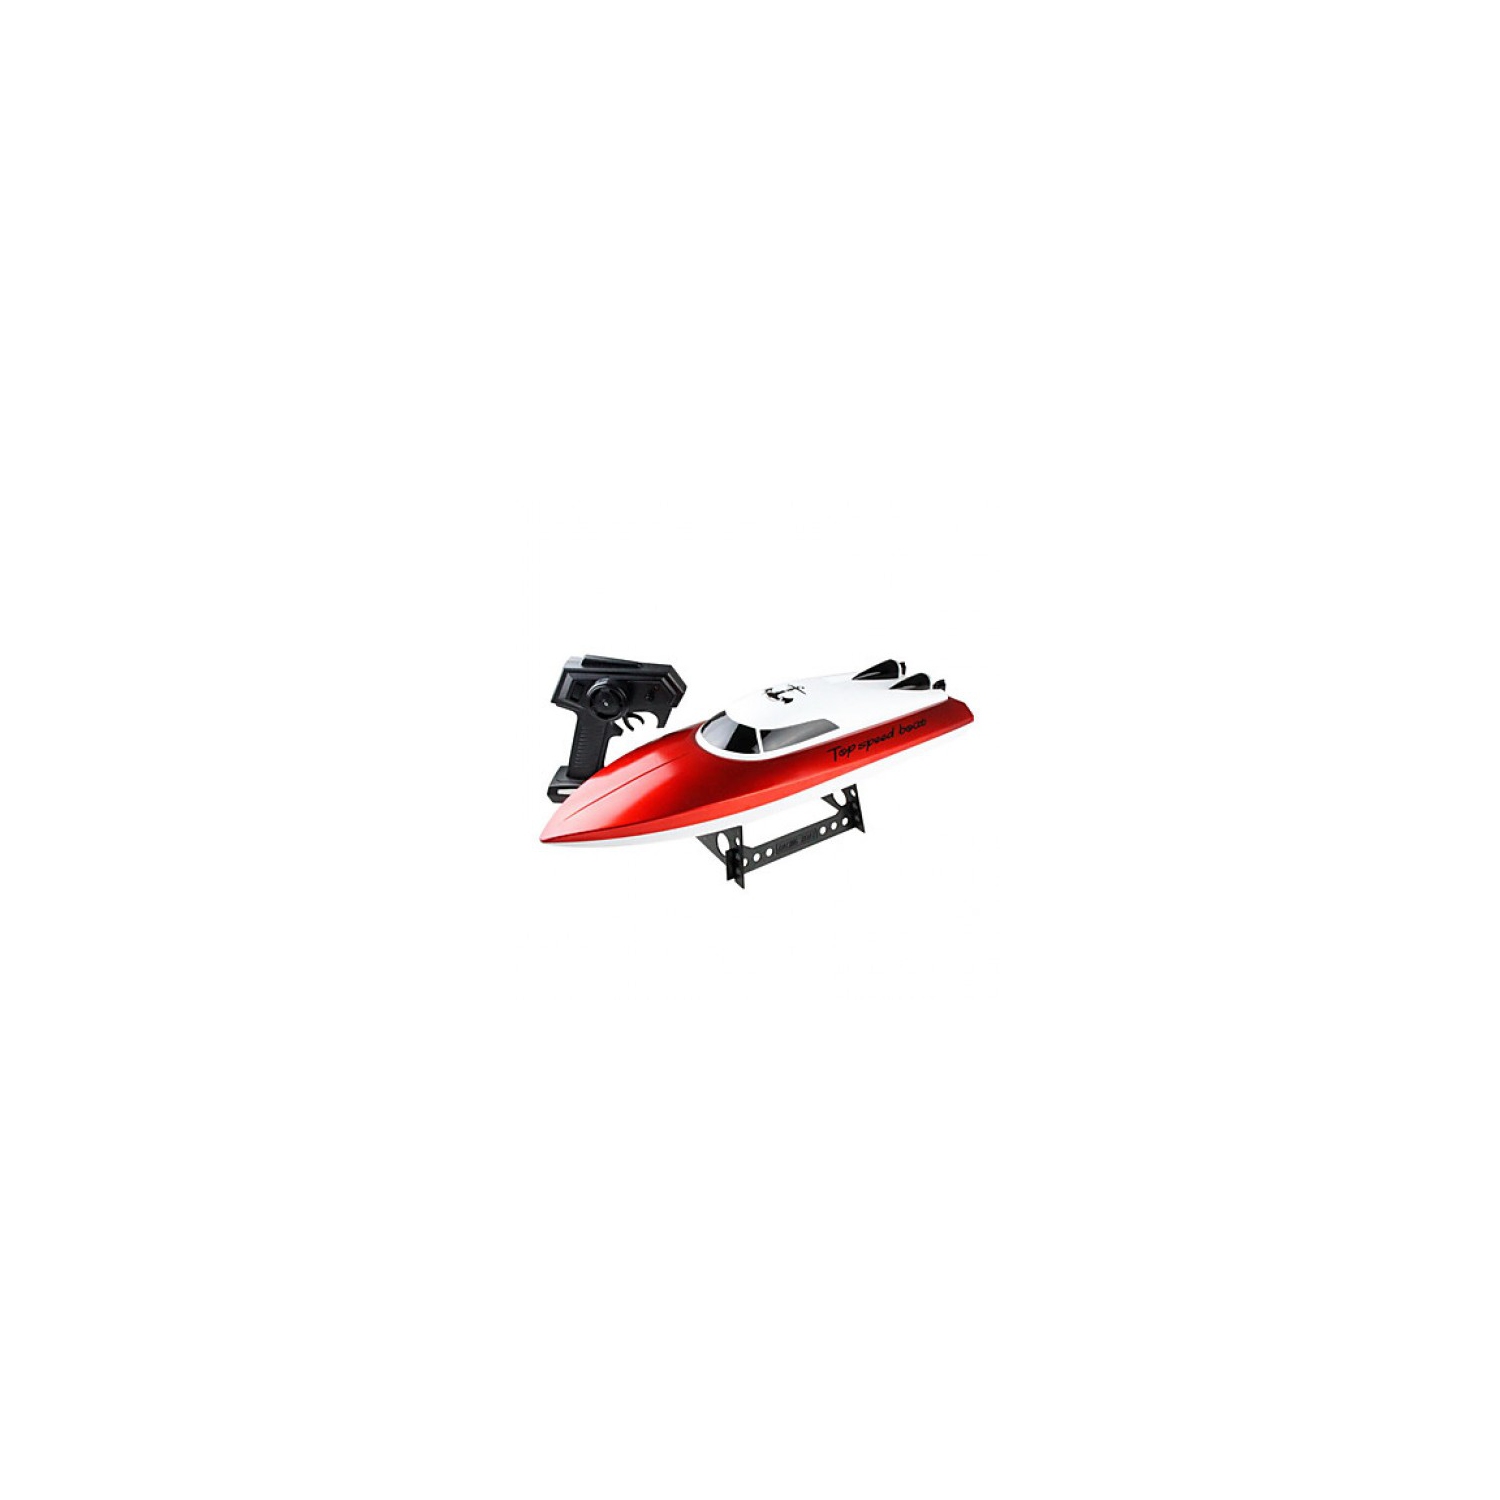 2.4G 1:10 Scale Remote 4 Chanel Control High Speed Racing Boat 801(Red)